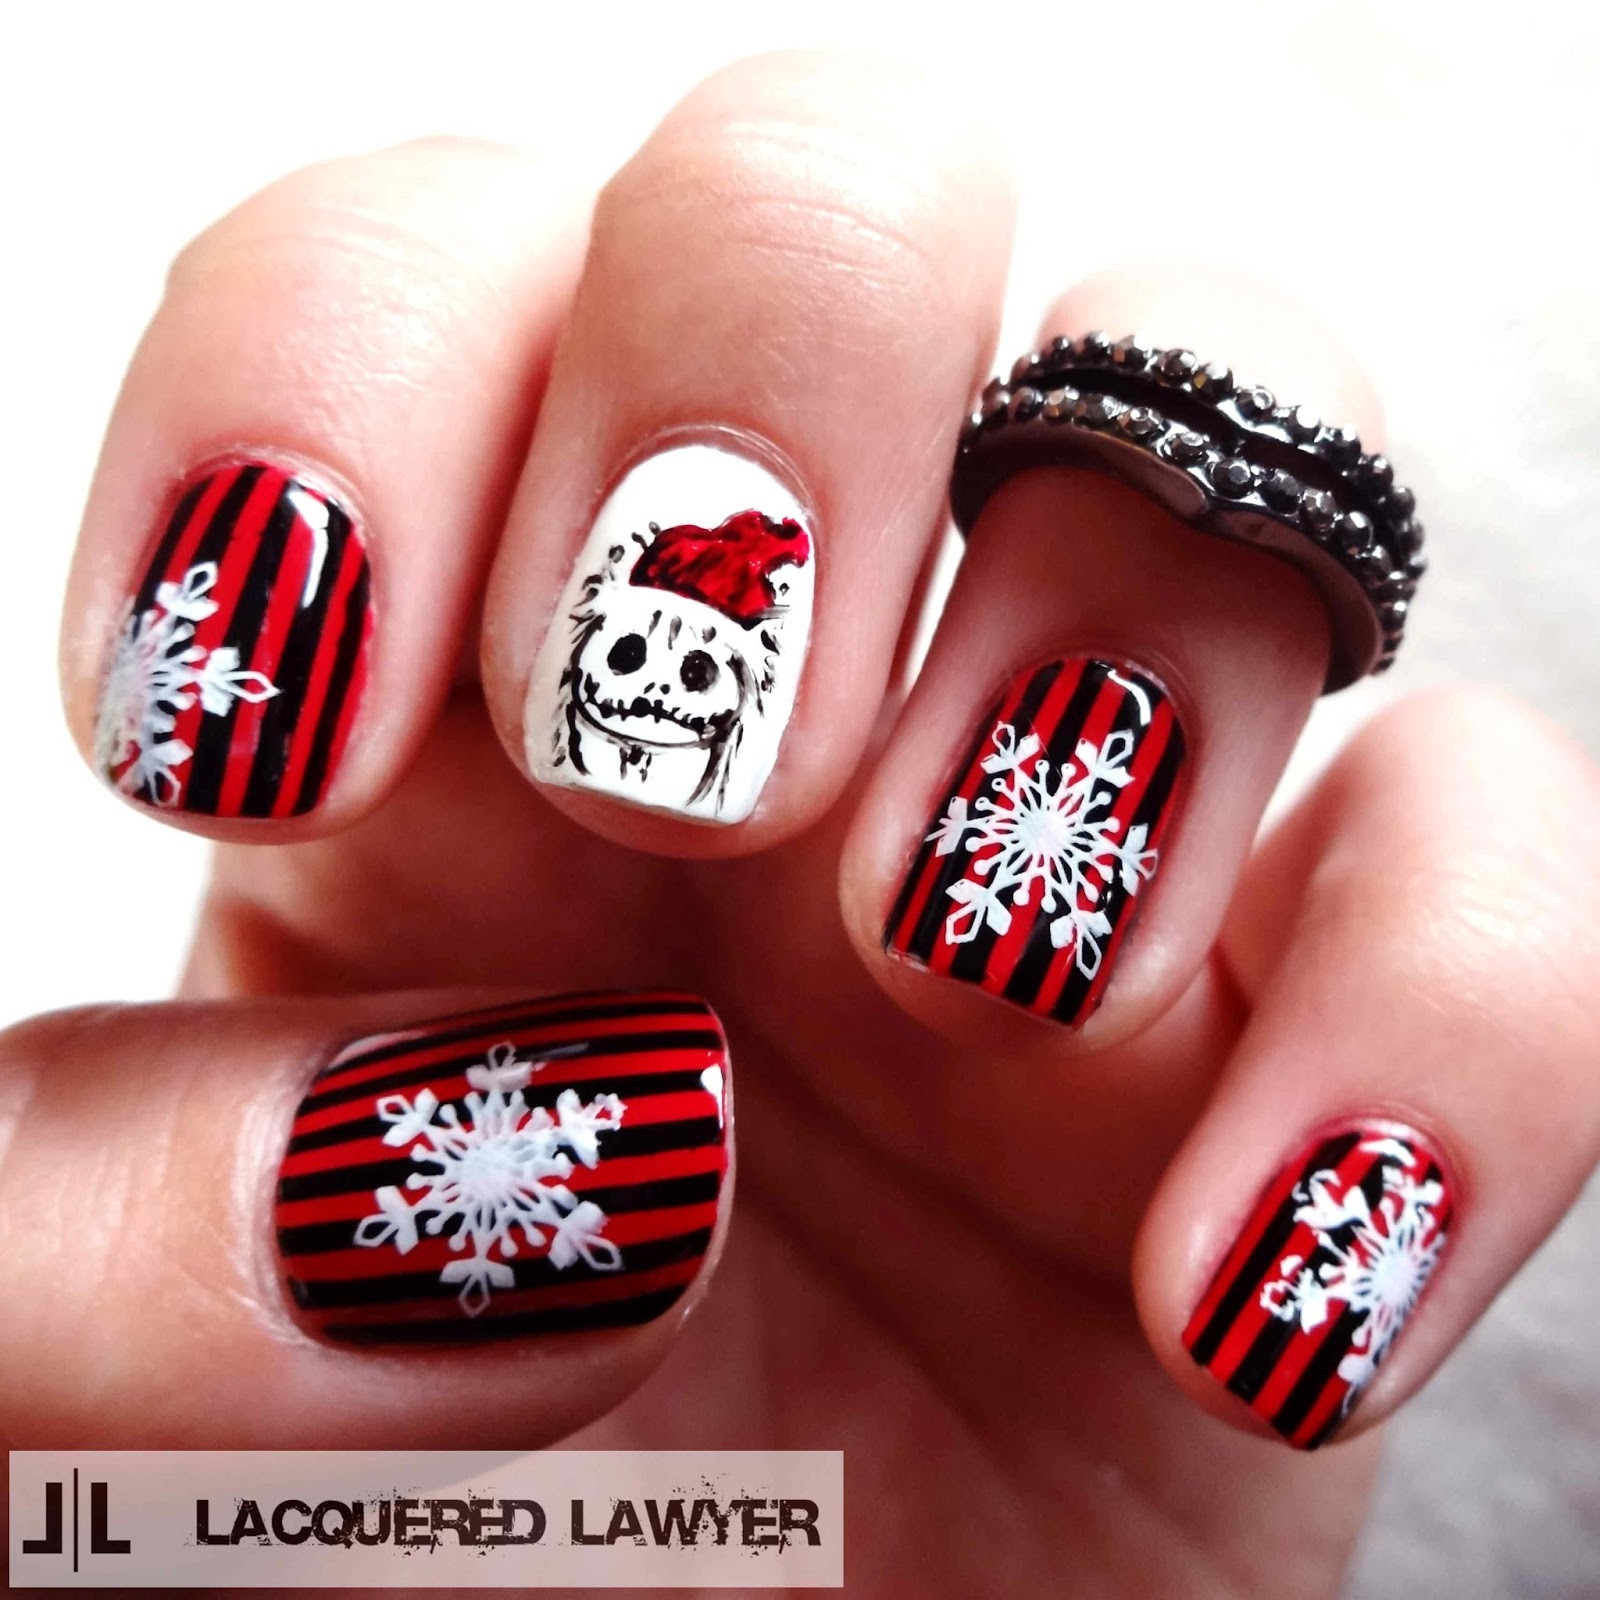 Nightmare Before Christmas Nail Art
 Lacquered Lawyer